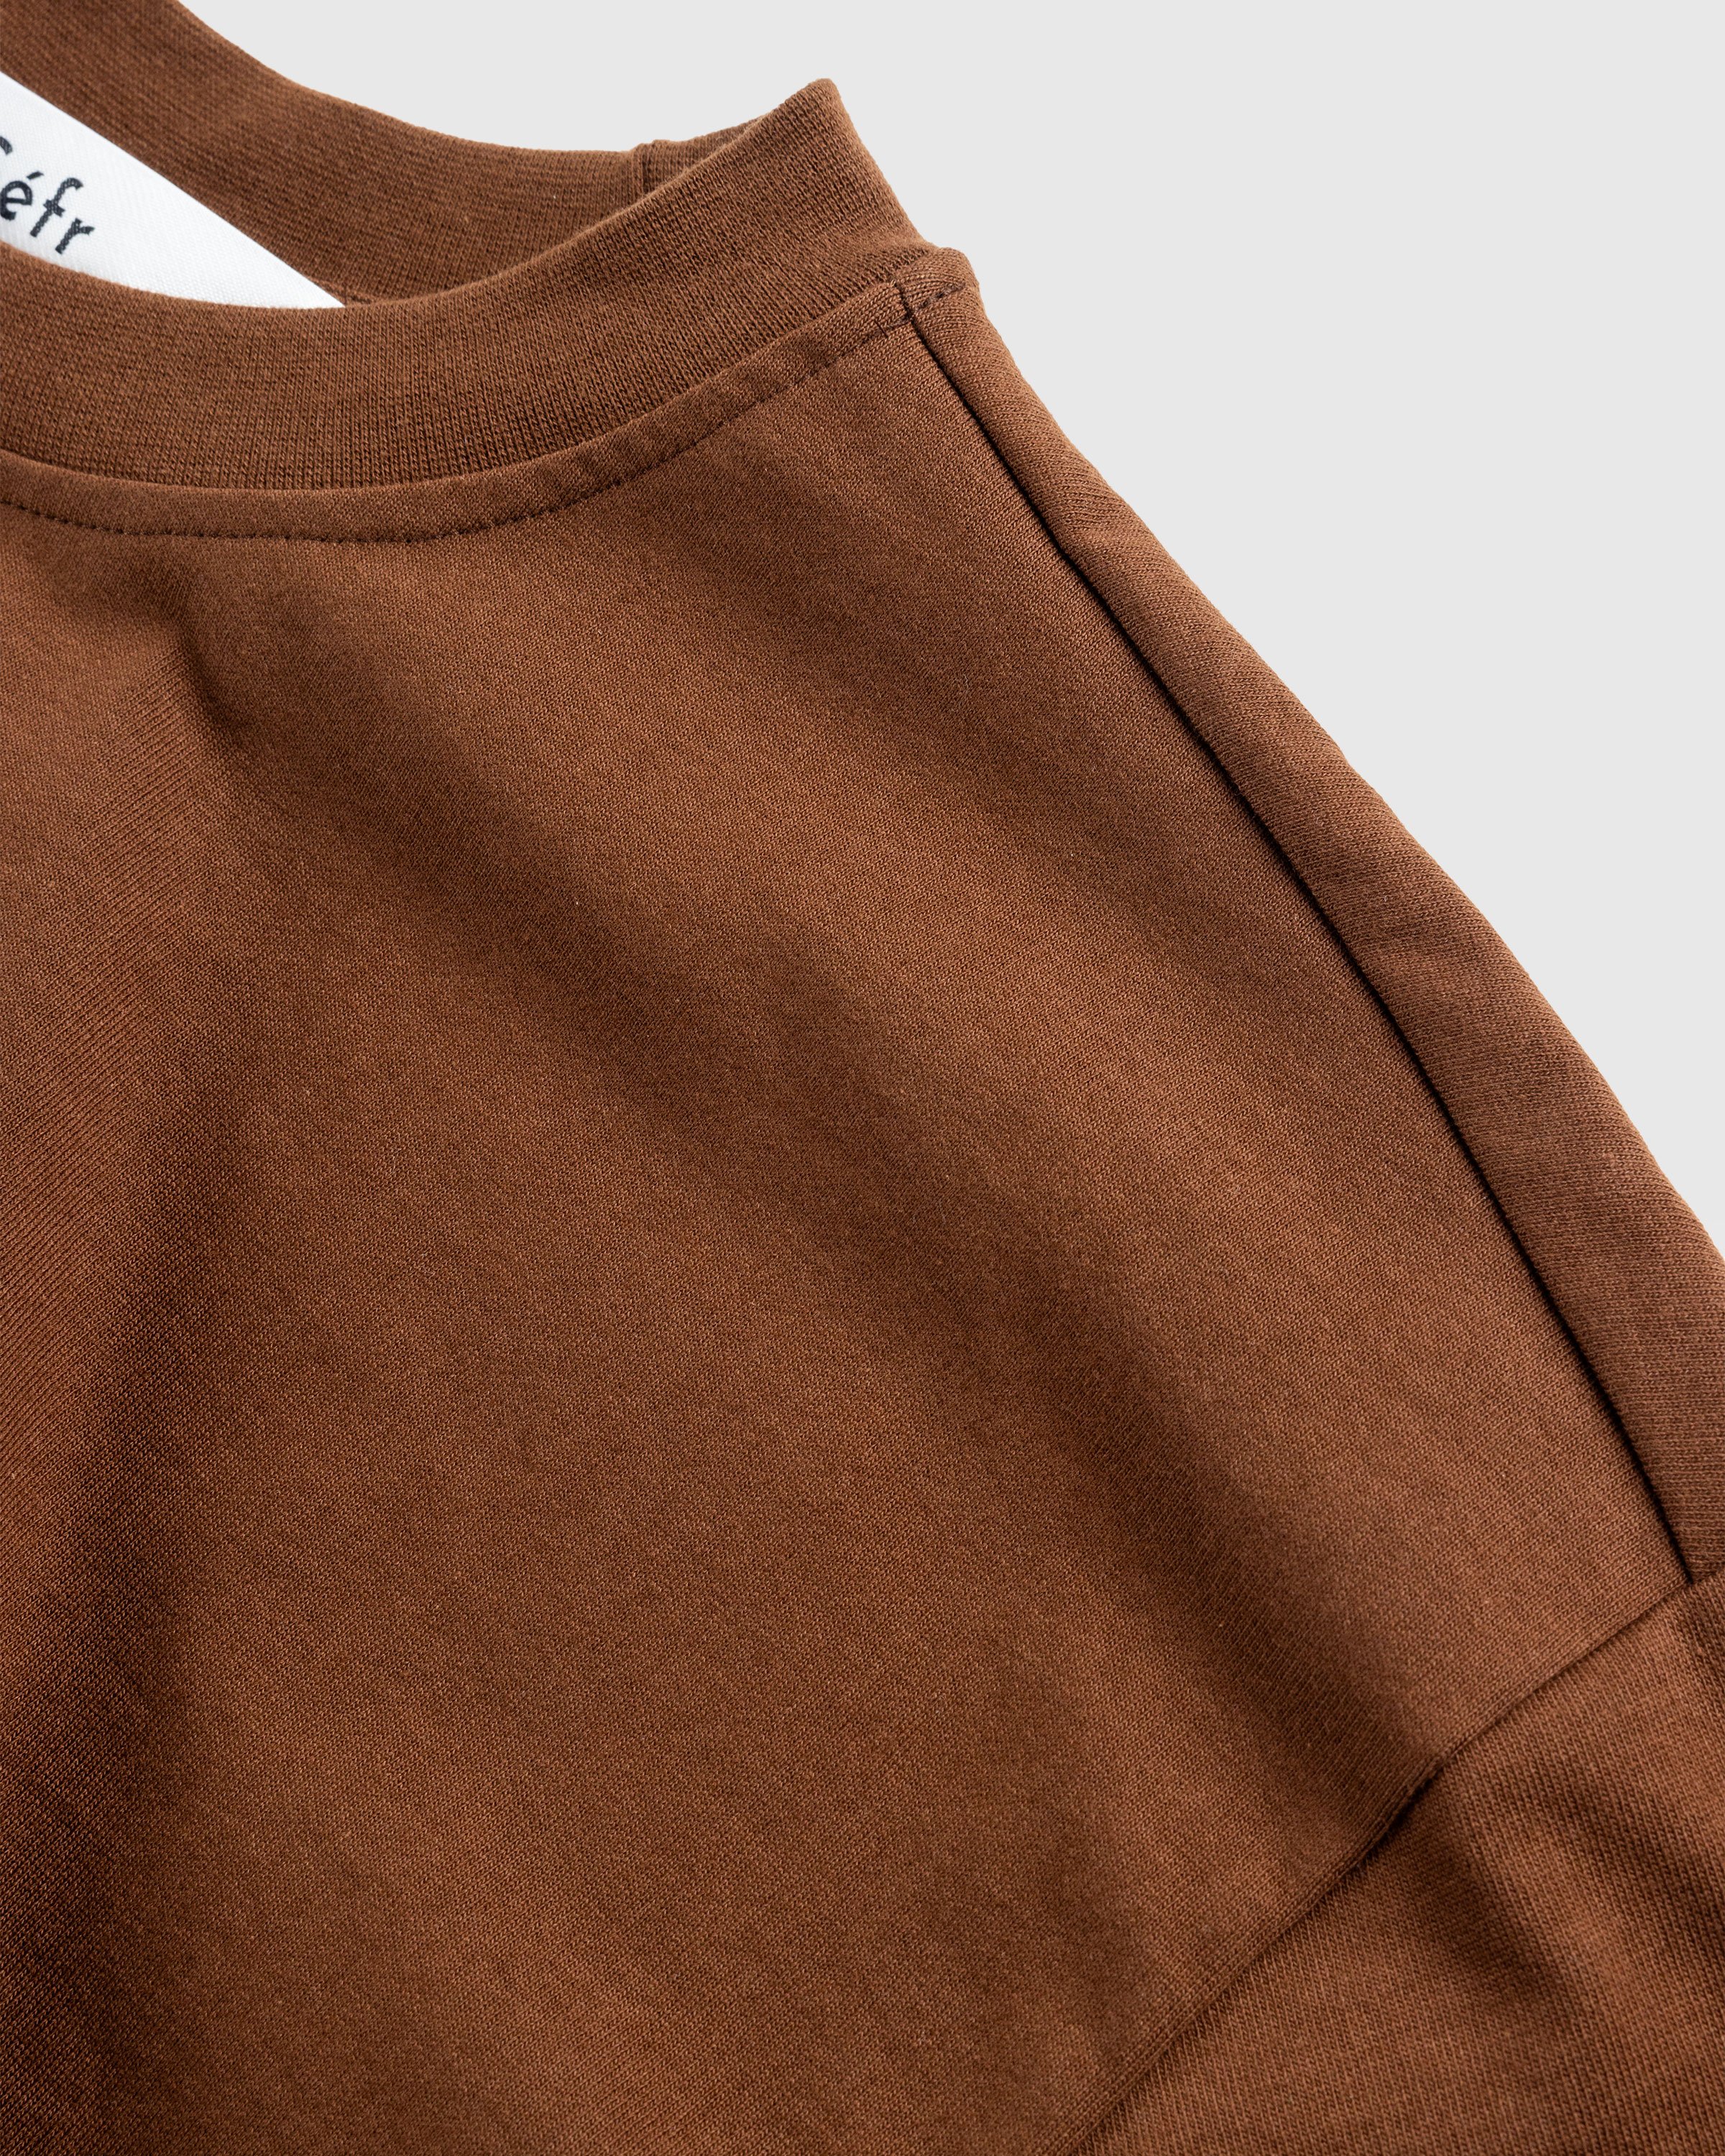 Séfr - ATELIER TEE HEAVY BROWN COTTON - Clothing - Brown - Image 7